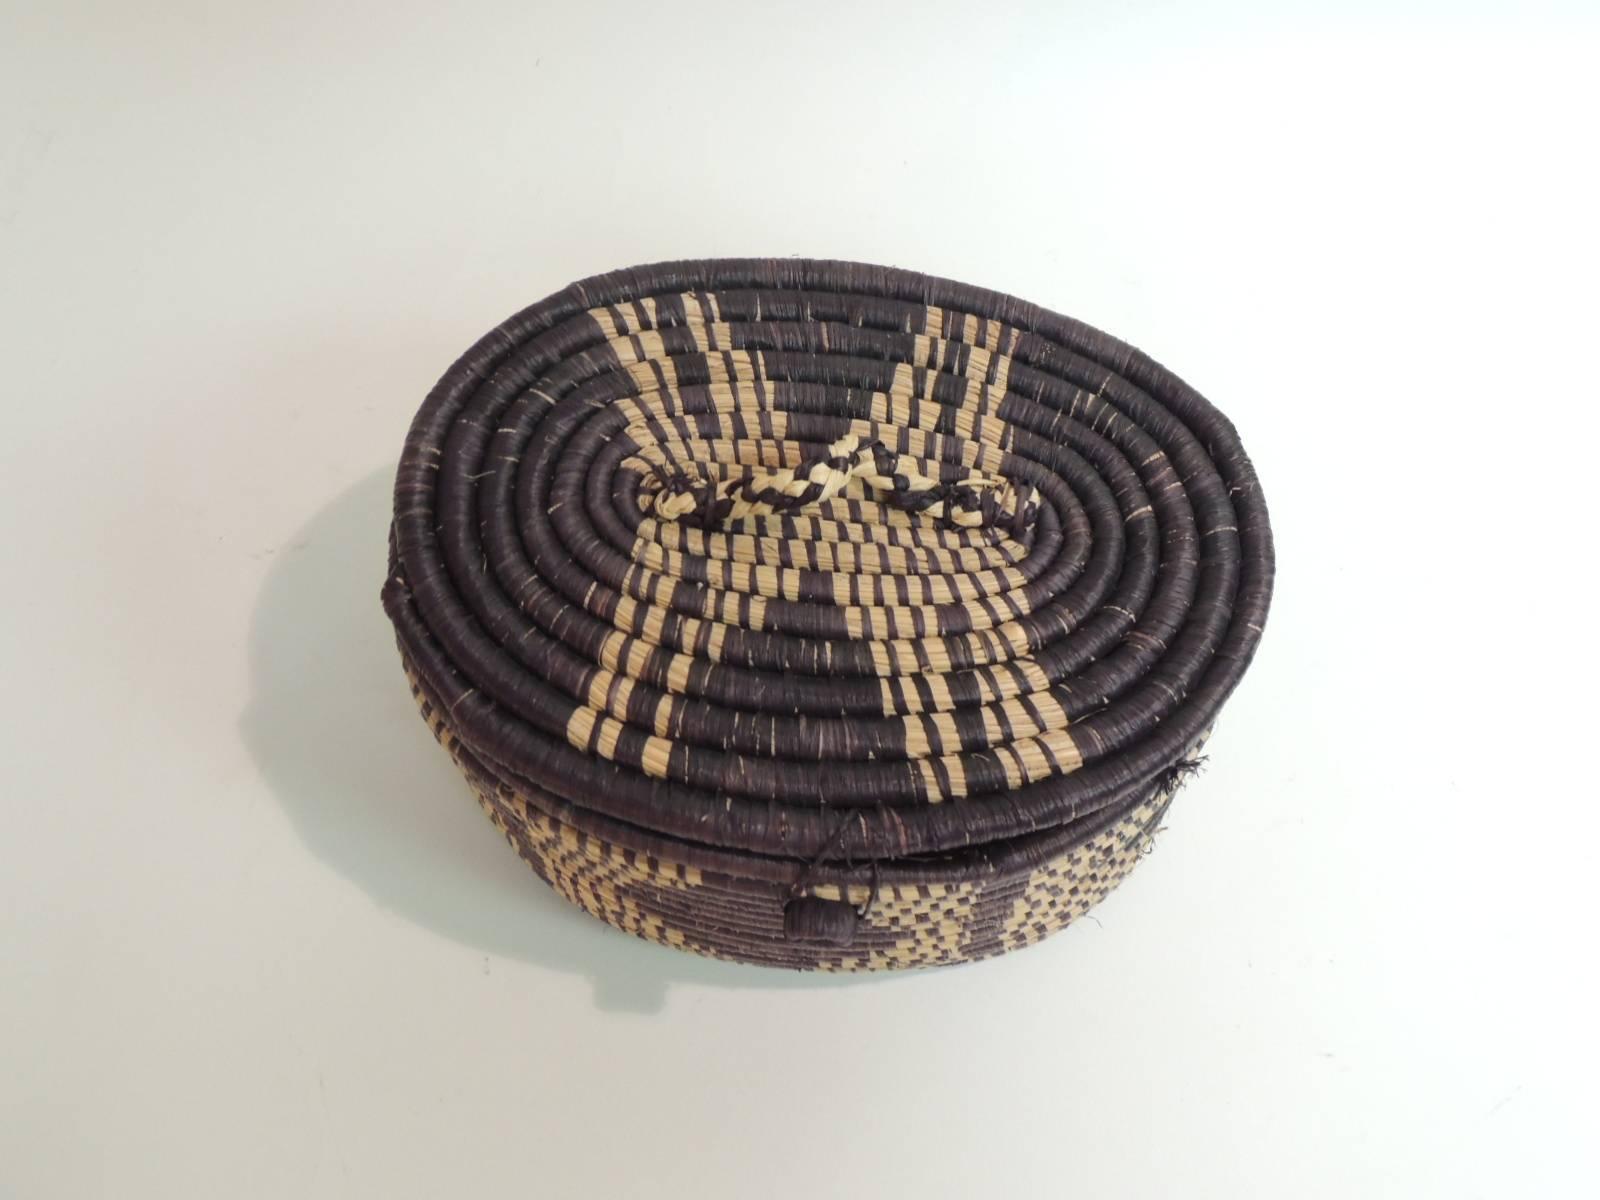 African Hand-Woven Oval Artisanal Basket with Lid
African hand-woven oval artisanal basket with a lid made by women in Uganda. Artisanal basket with textured finish.
Size:6 x 8 x 5.5H
